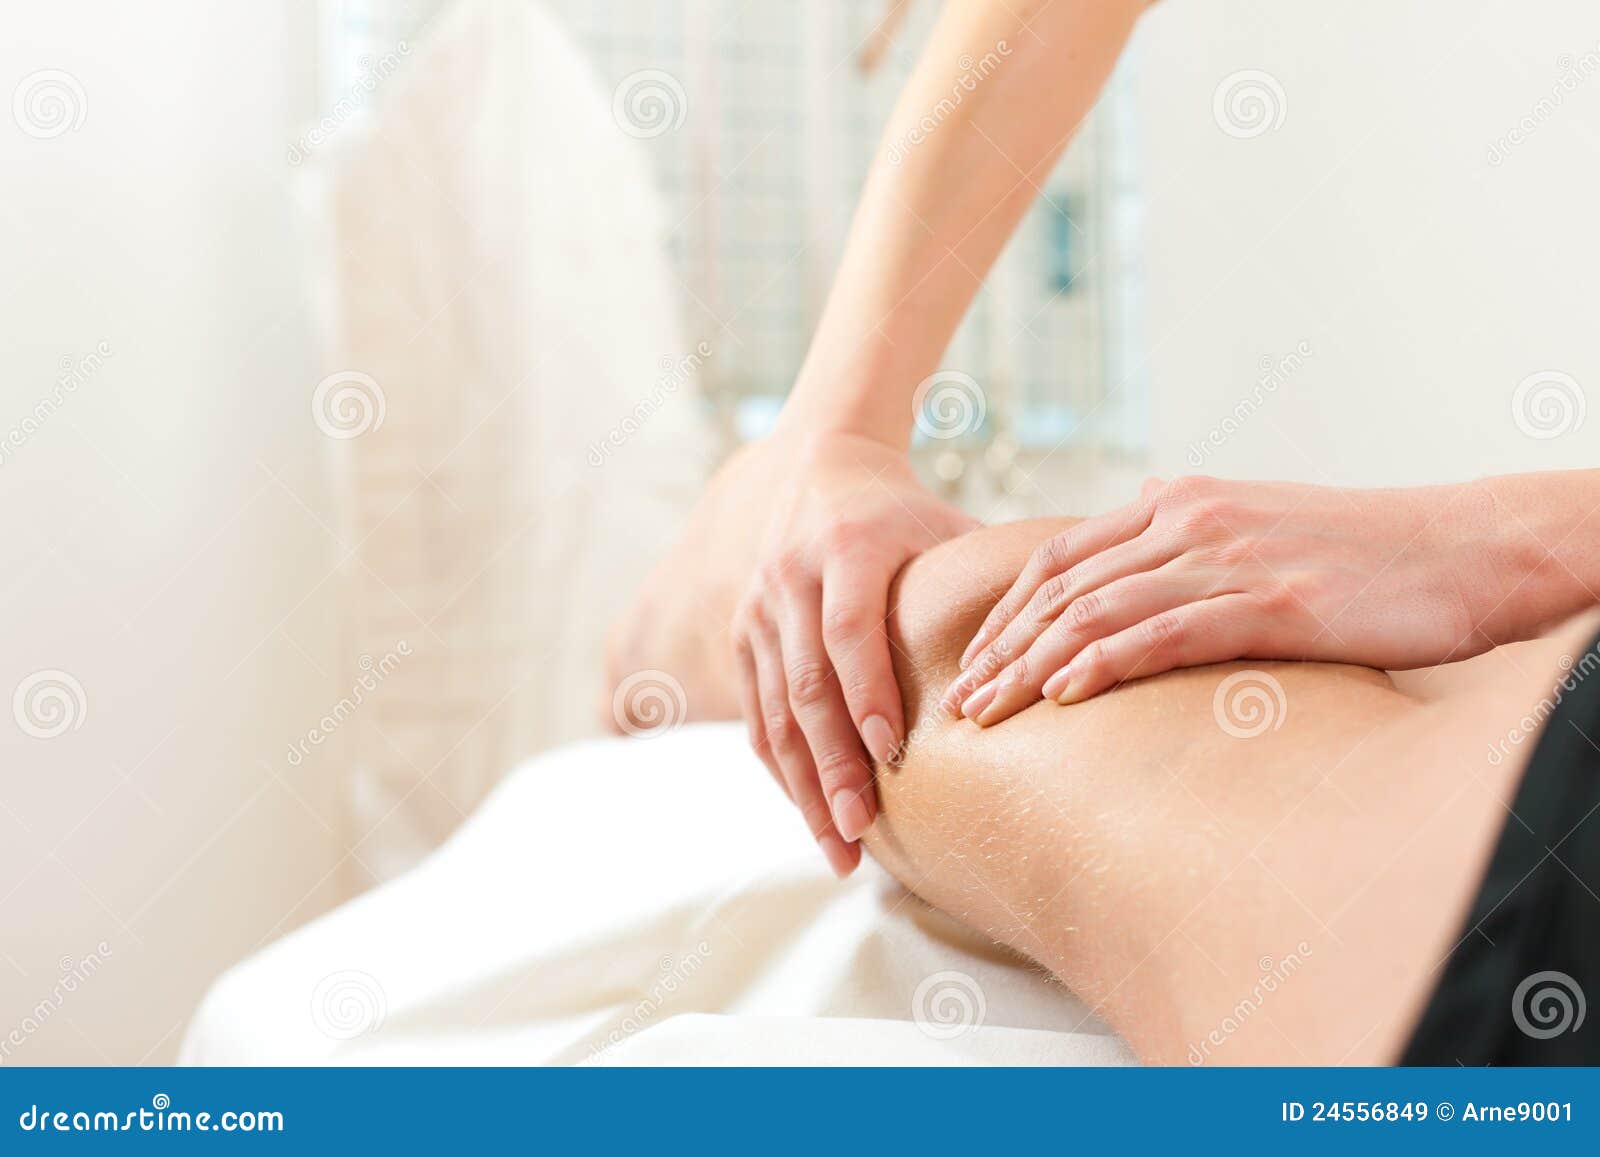 patient at the physiotherapy - massage